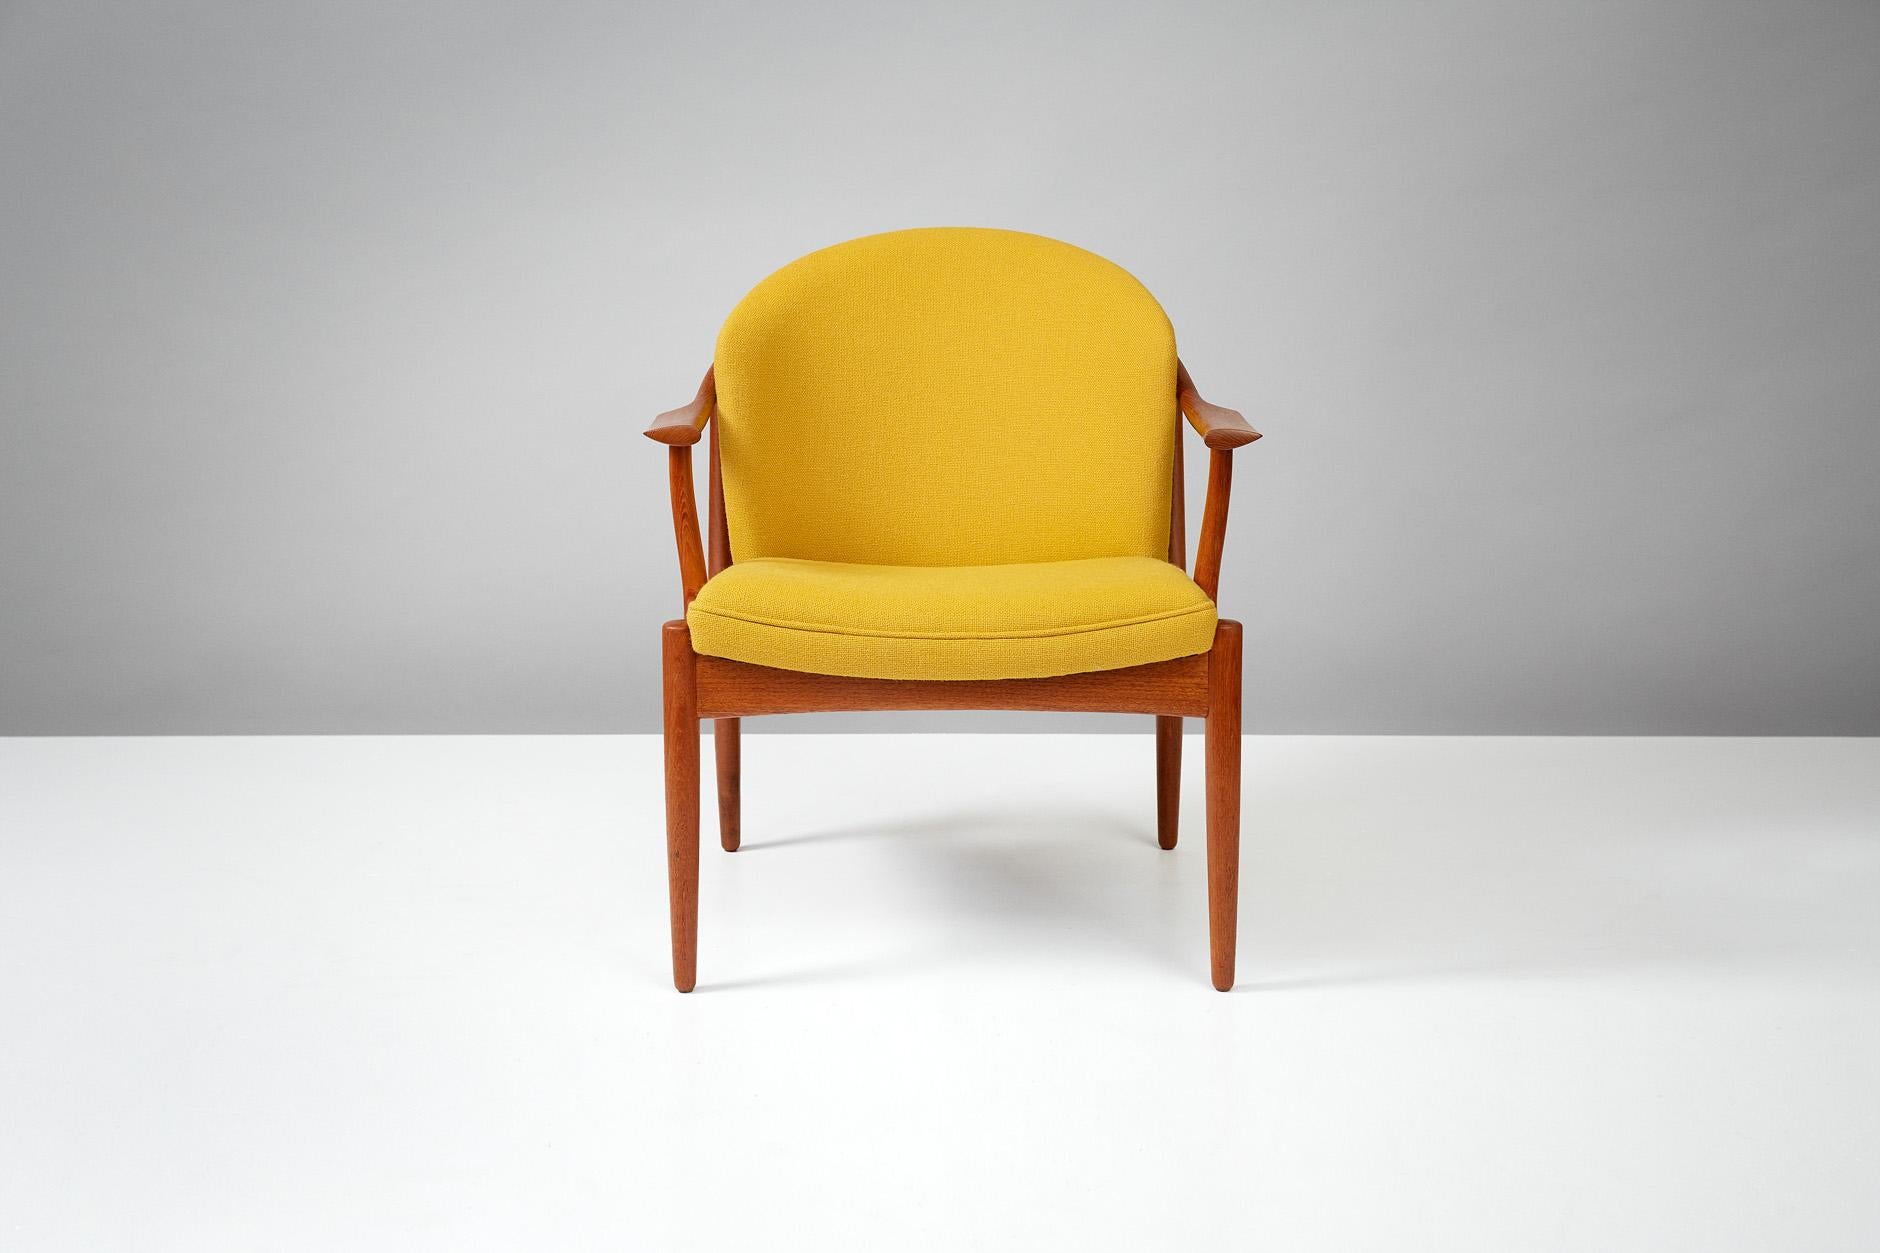 Johannes Andersen

Lounge chair, circa 1960s.

Teak lounge chair manufactured by C.F. Christensen, Denmark. Sculptural arms joined by continuous, steam-bent back piece. Seat reupholstered in yellow Kvadrat wool fabric.